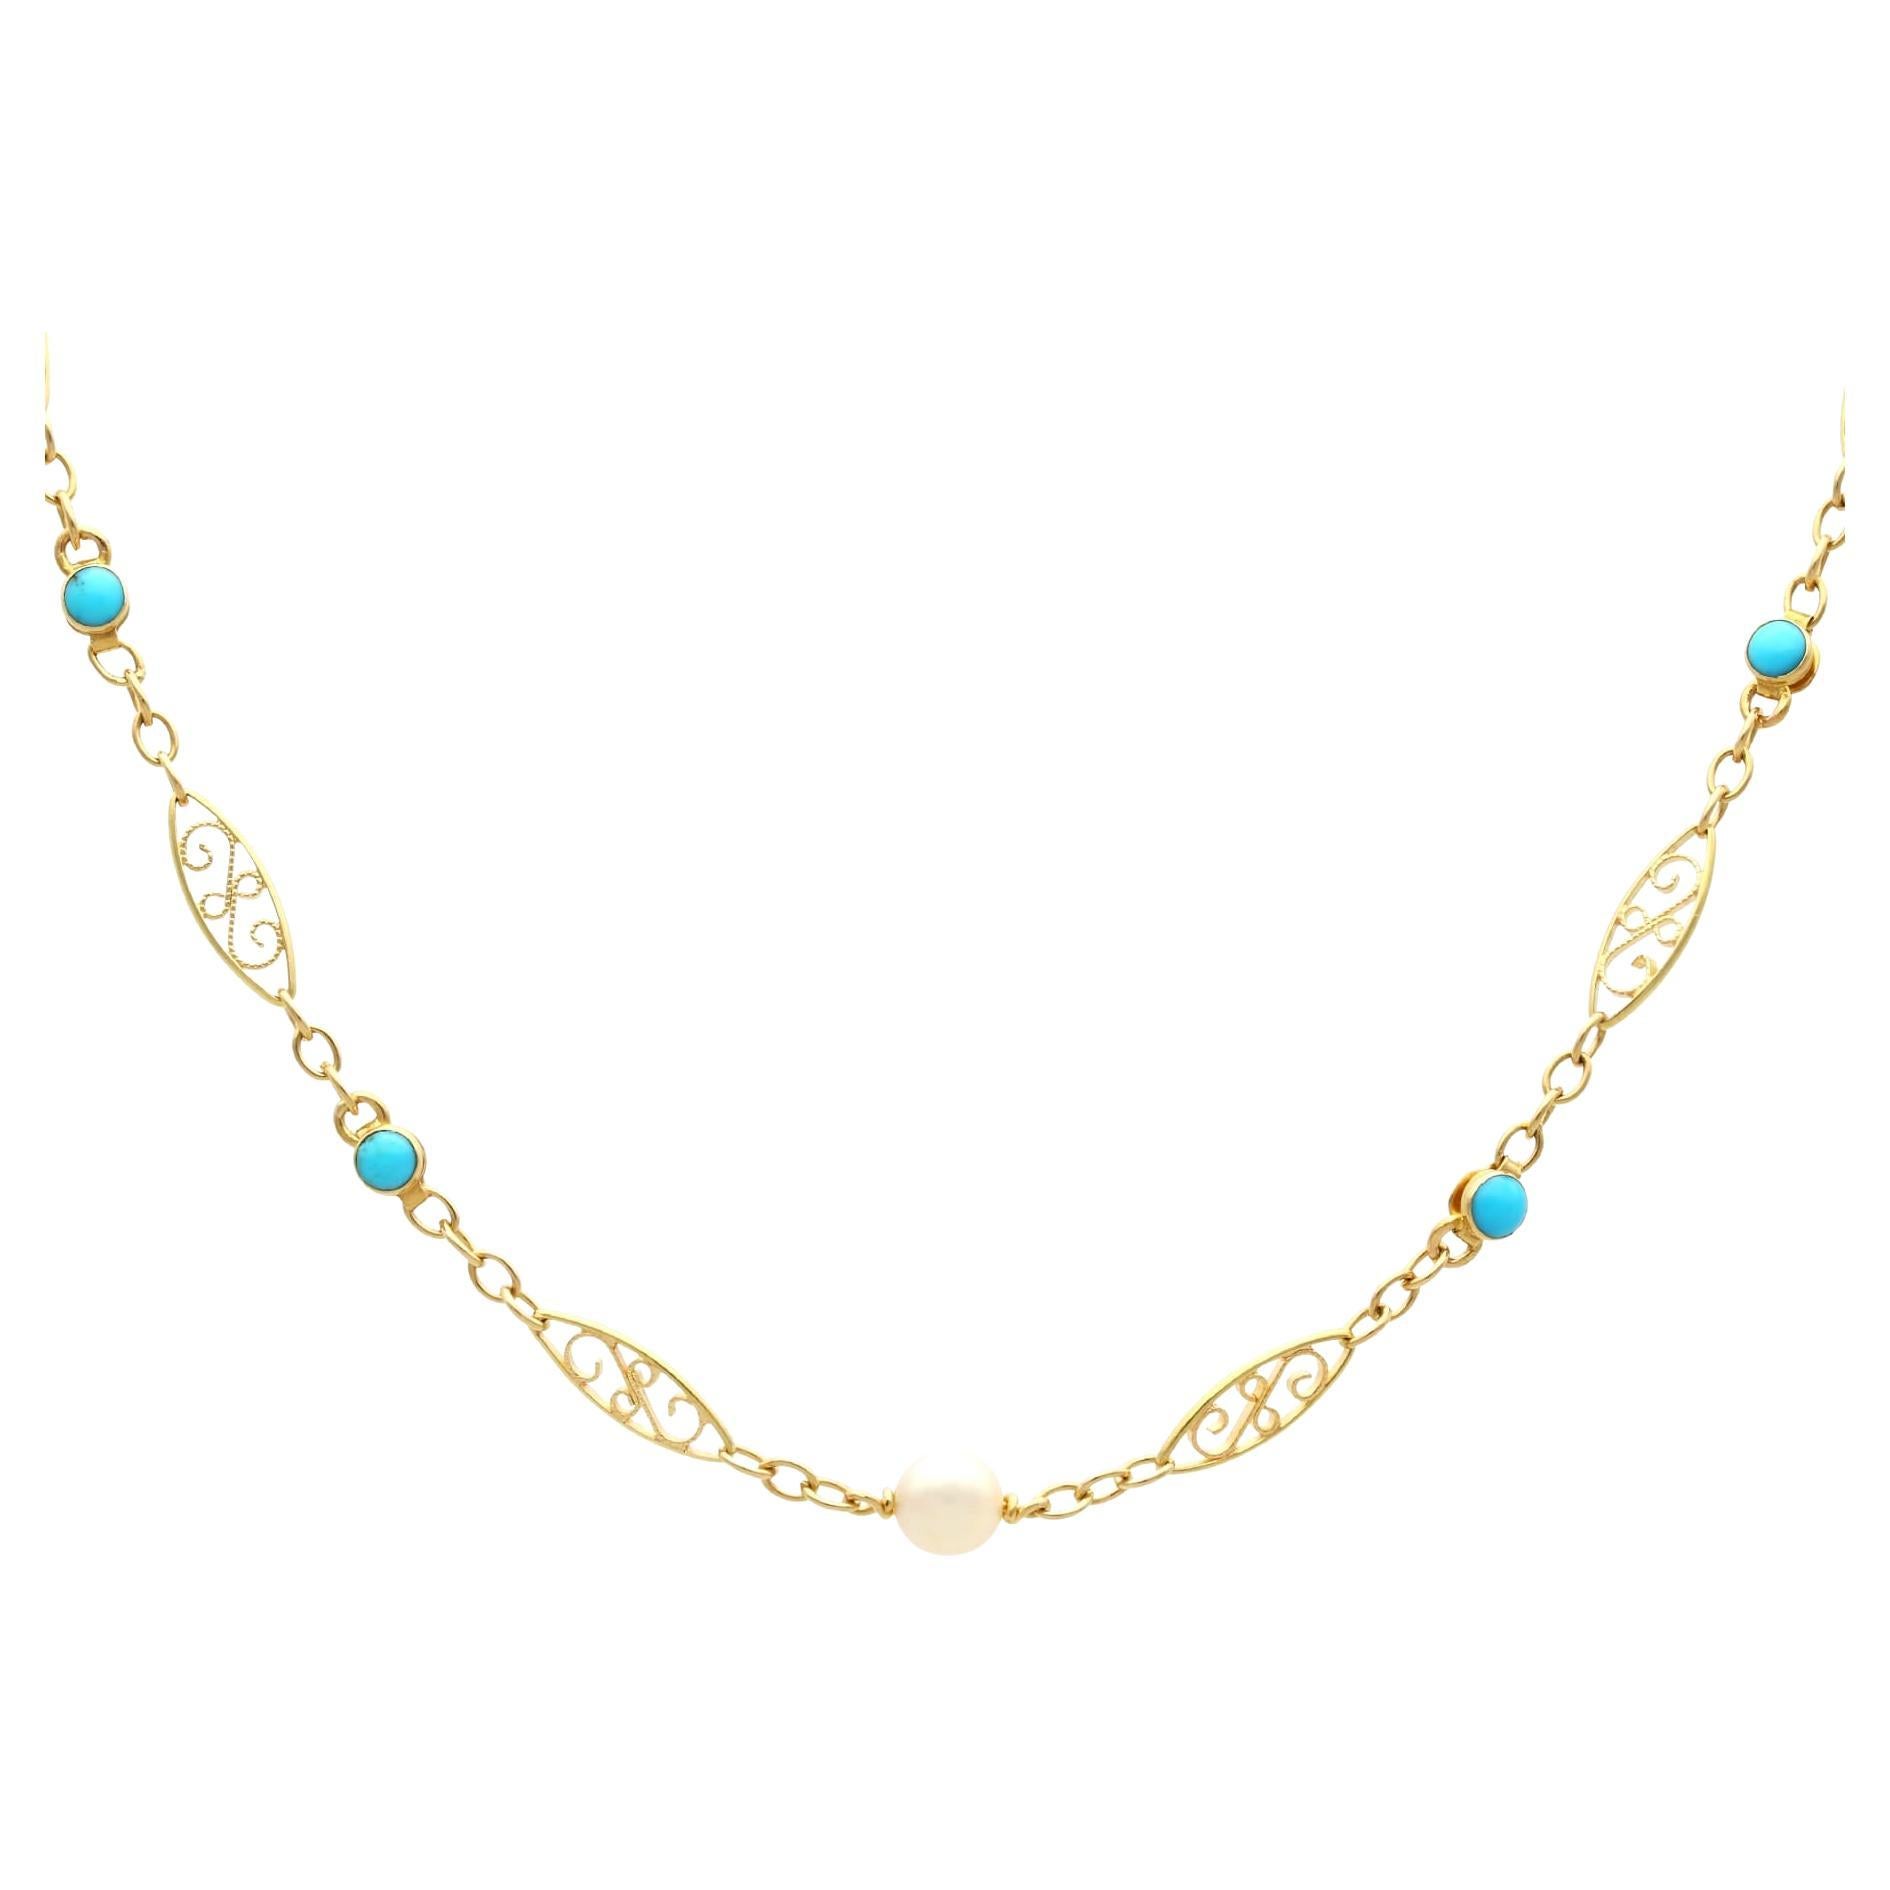 Vintage 3.12 Carat Turquoise and Cultured Pearl 18k Yellow Gold Longuard Chain